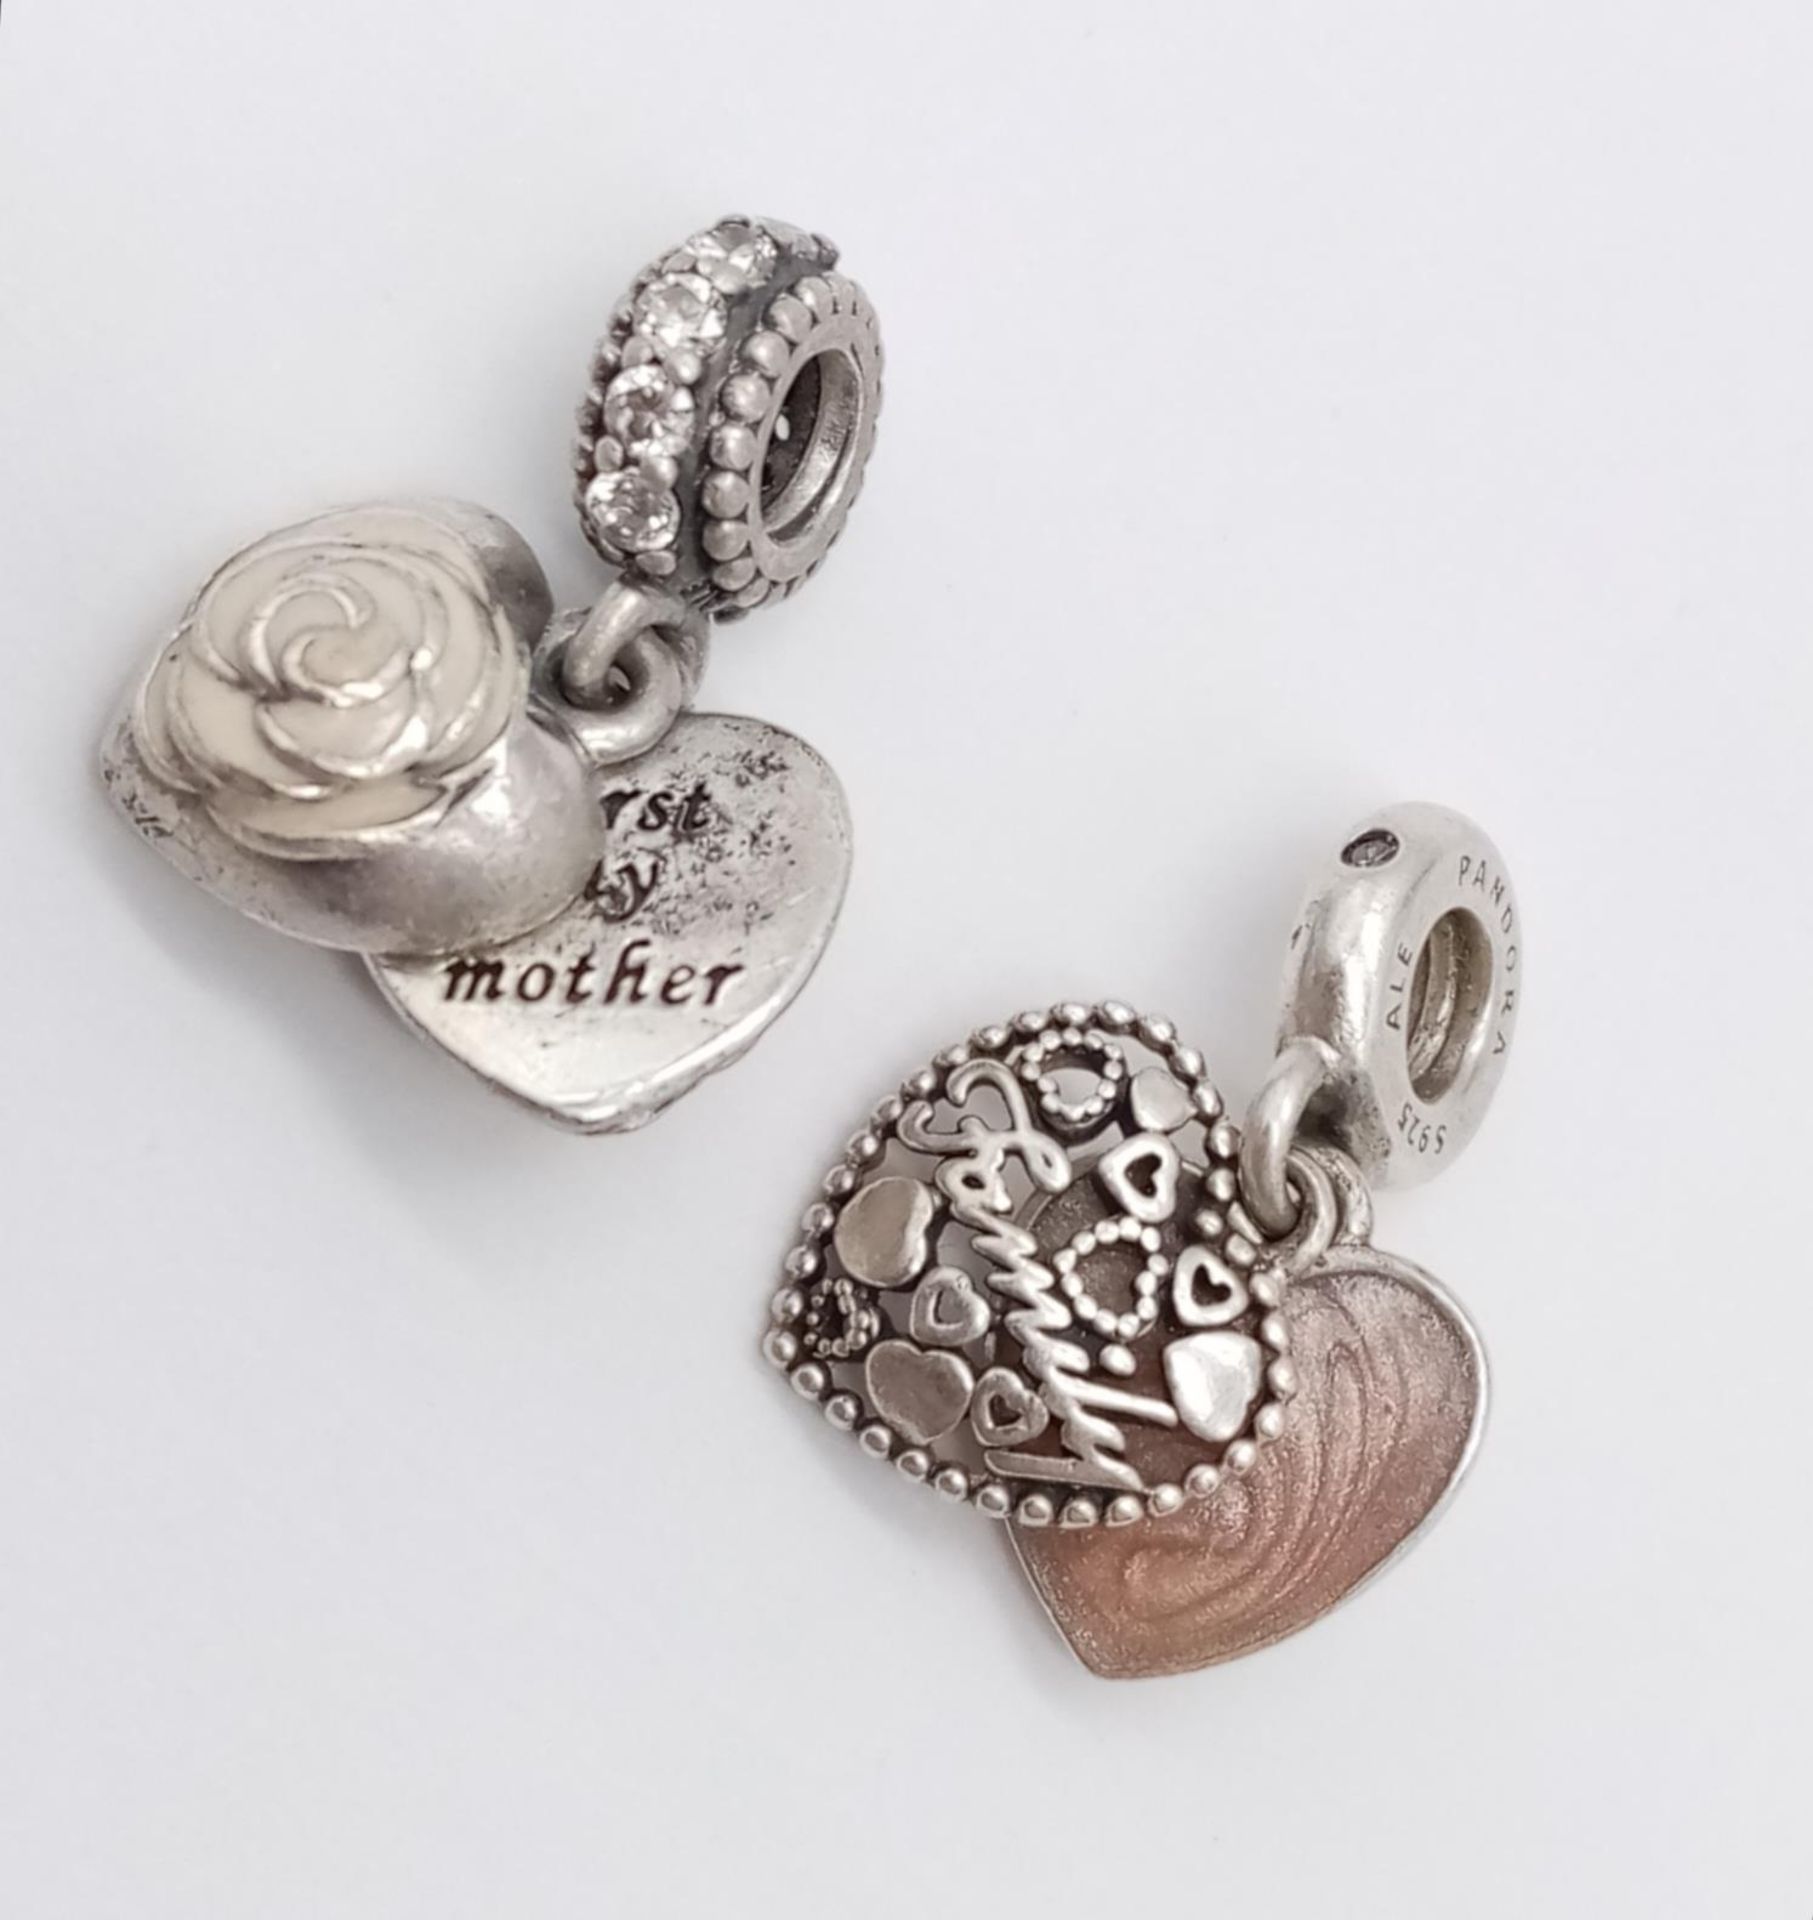 2 x Pandora Sterling Silver Heart Charms - one says 'Family' and the other says 'First My Mother, - Image 2 of 7